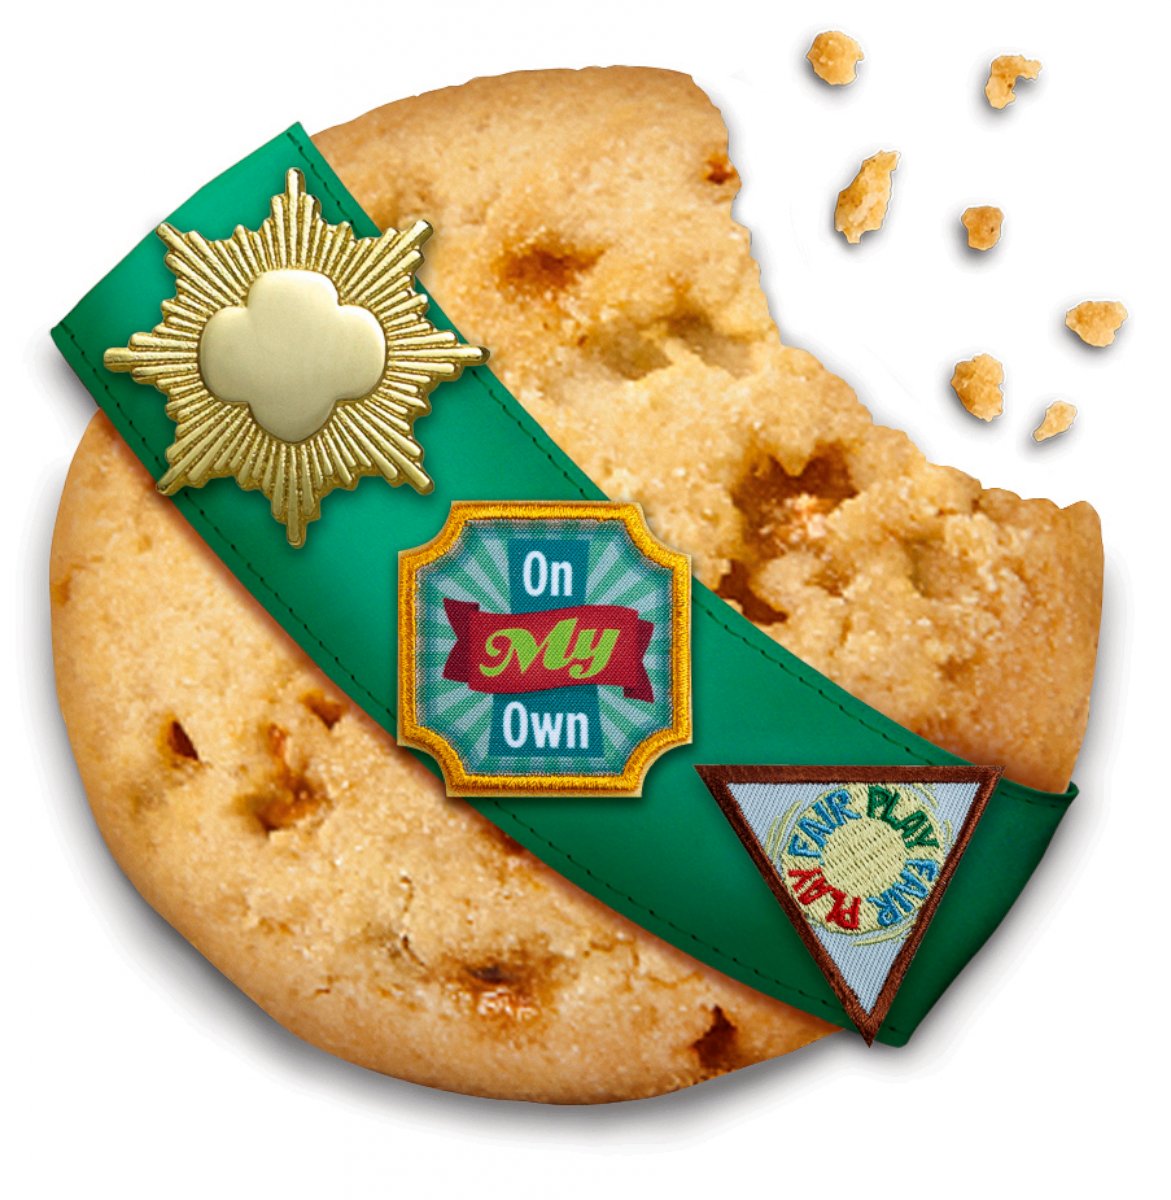 PHOTO: The Girl Scouts are adding three new cookie varieties to their delicious ranks this year: Rah-Rah Raisin oatmeal cookies and two gluten-free. 